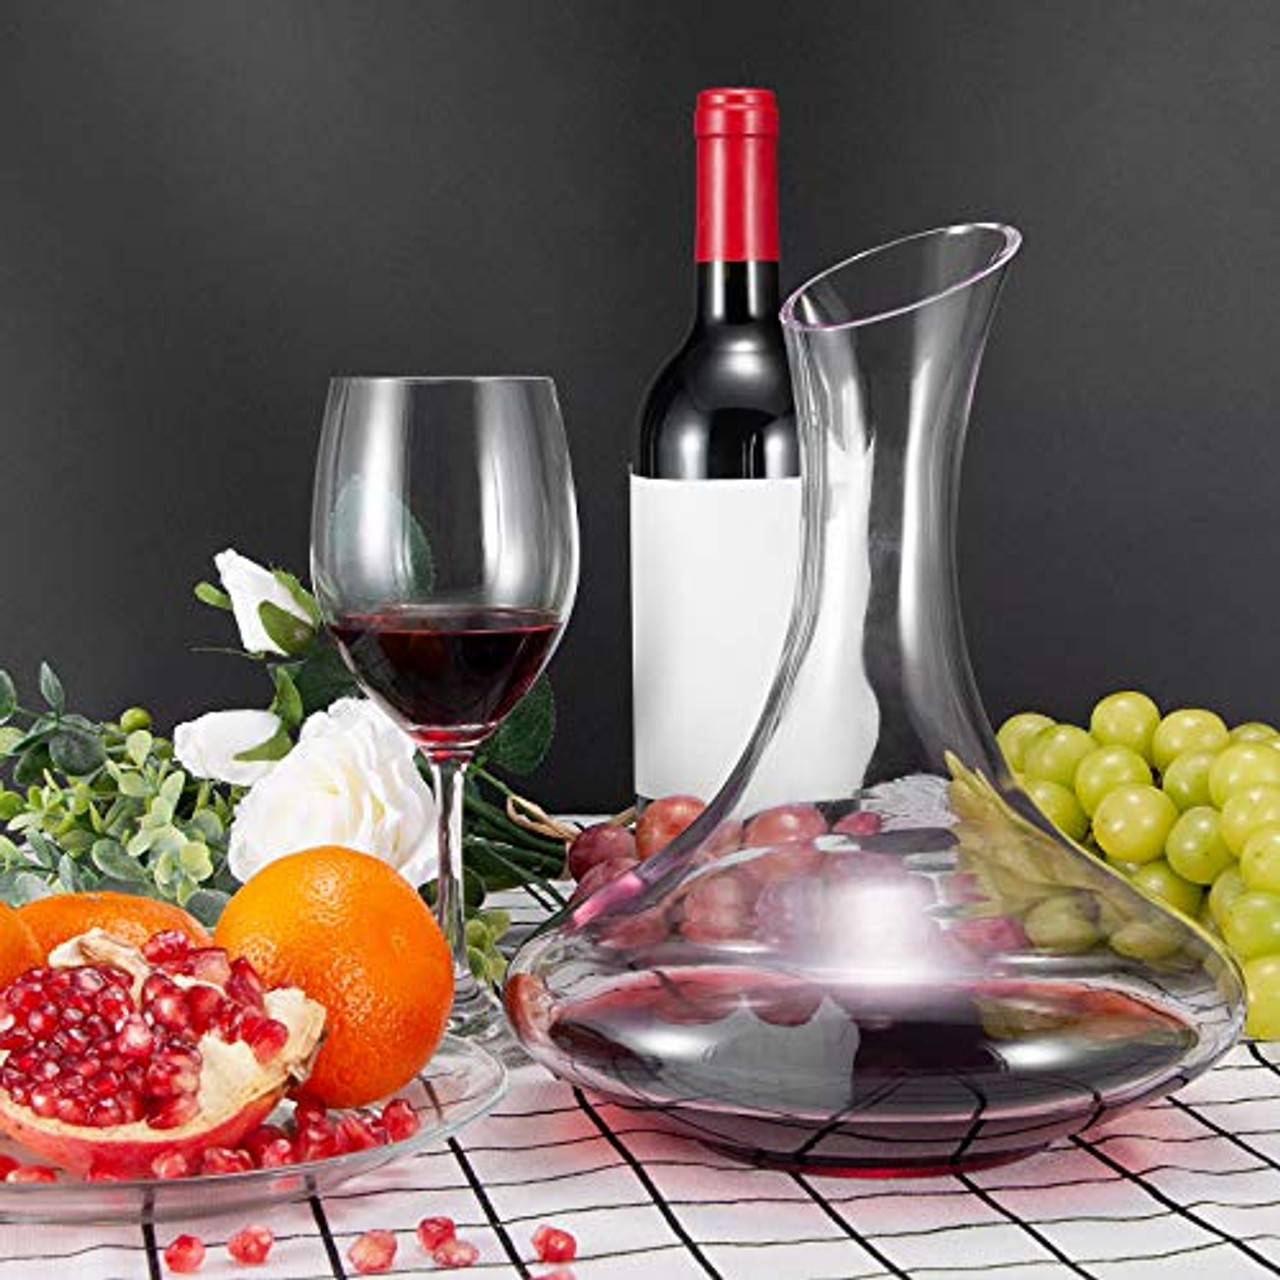 1800ML Crystal Glass 64 Oz Wine Decanter Wine Carafe Gifts for Red Wine  Lover, Decanter with